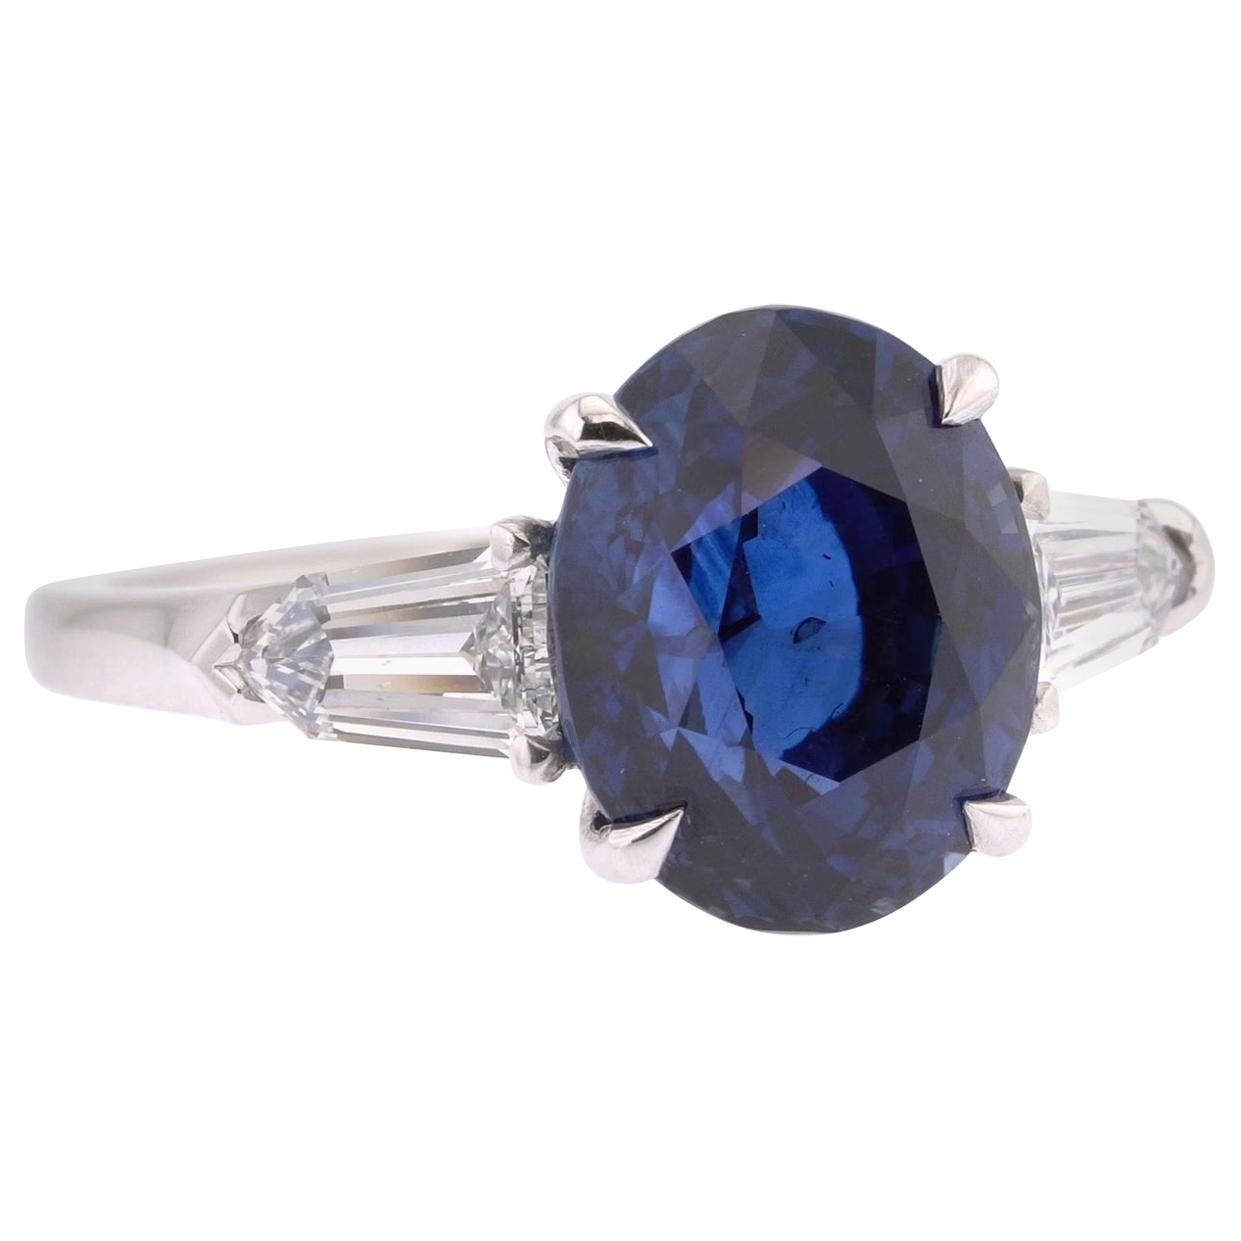 This modern take on a classic three-stone ring was hand-made in the Haruni atelier and is as sophisticated as it is striking. The large centre sapphire (5.29 carats GRS certified) commands attention with its graceful oval shape and deep blue colour,